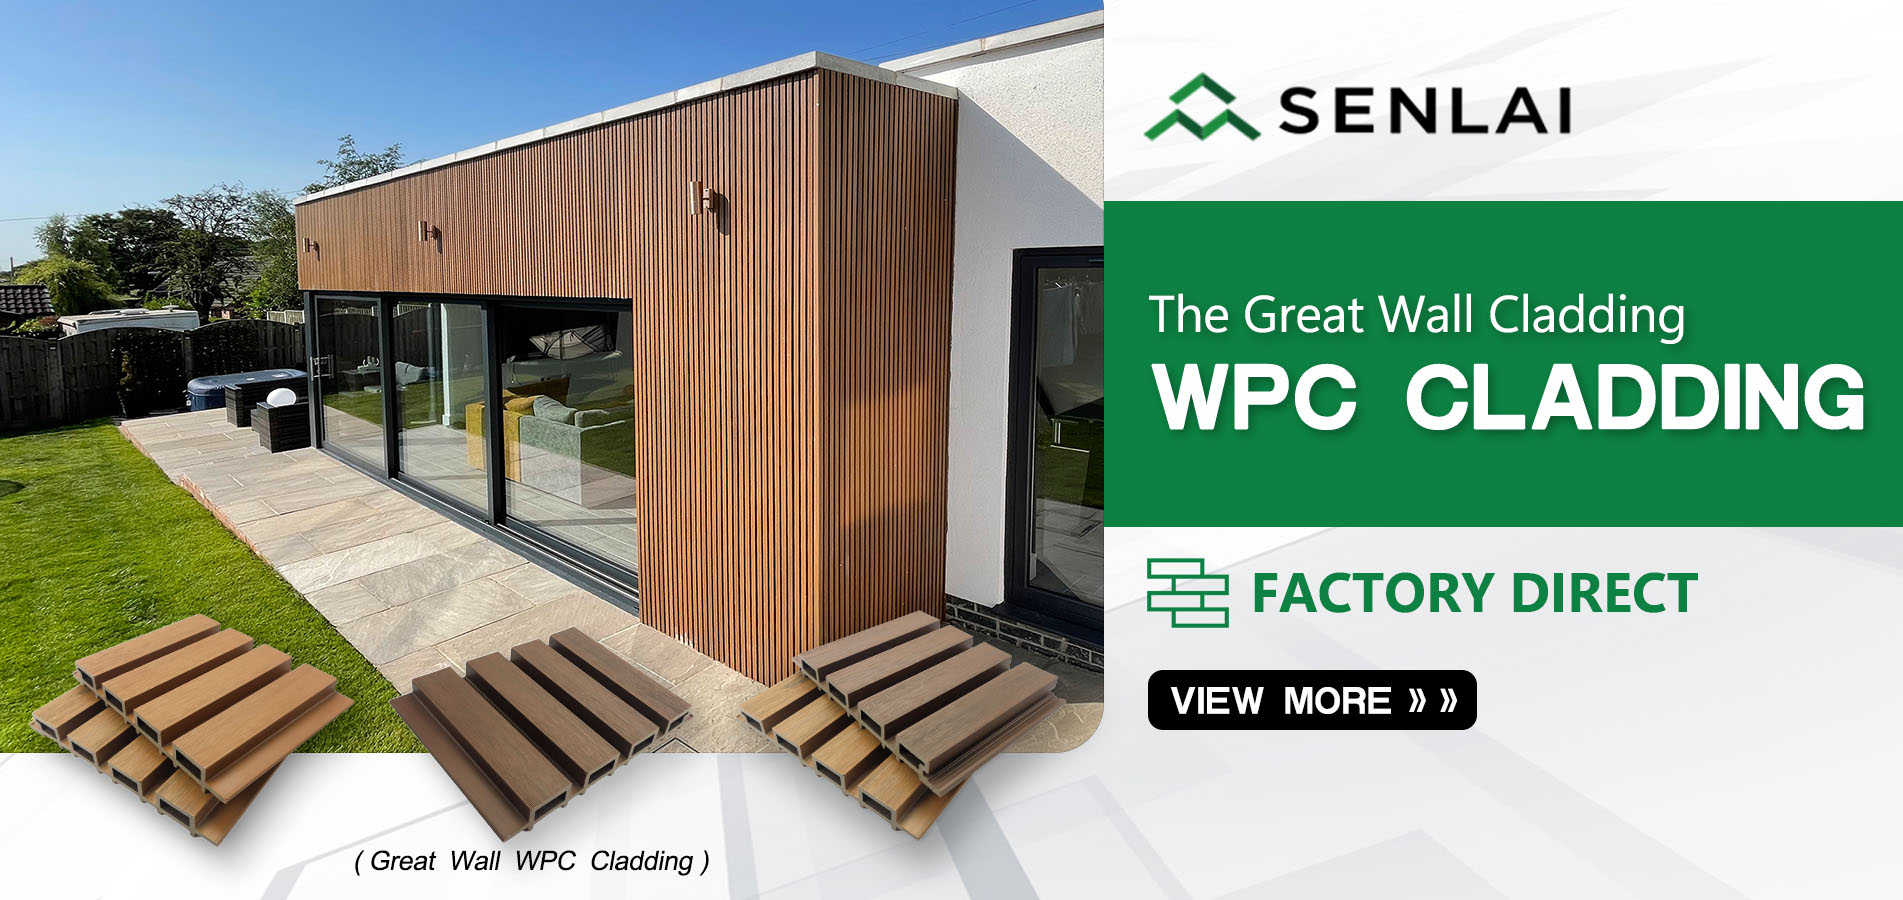 WPC great wall cladding